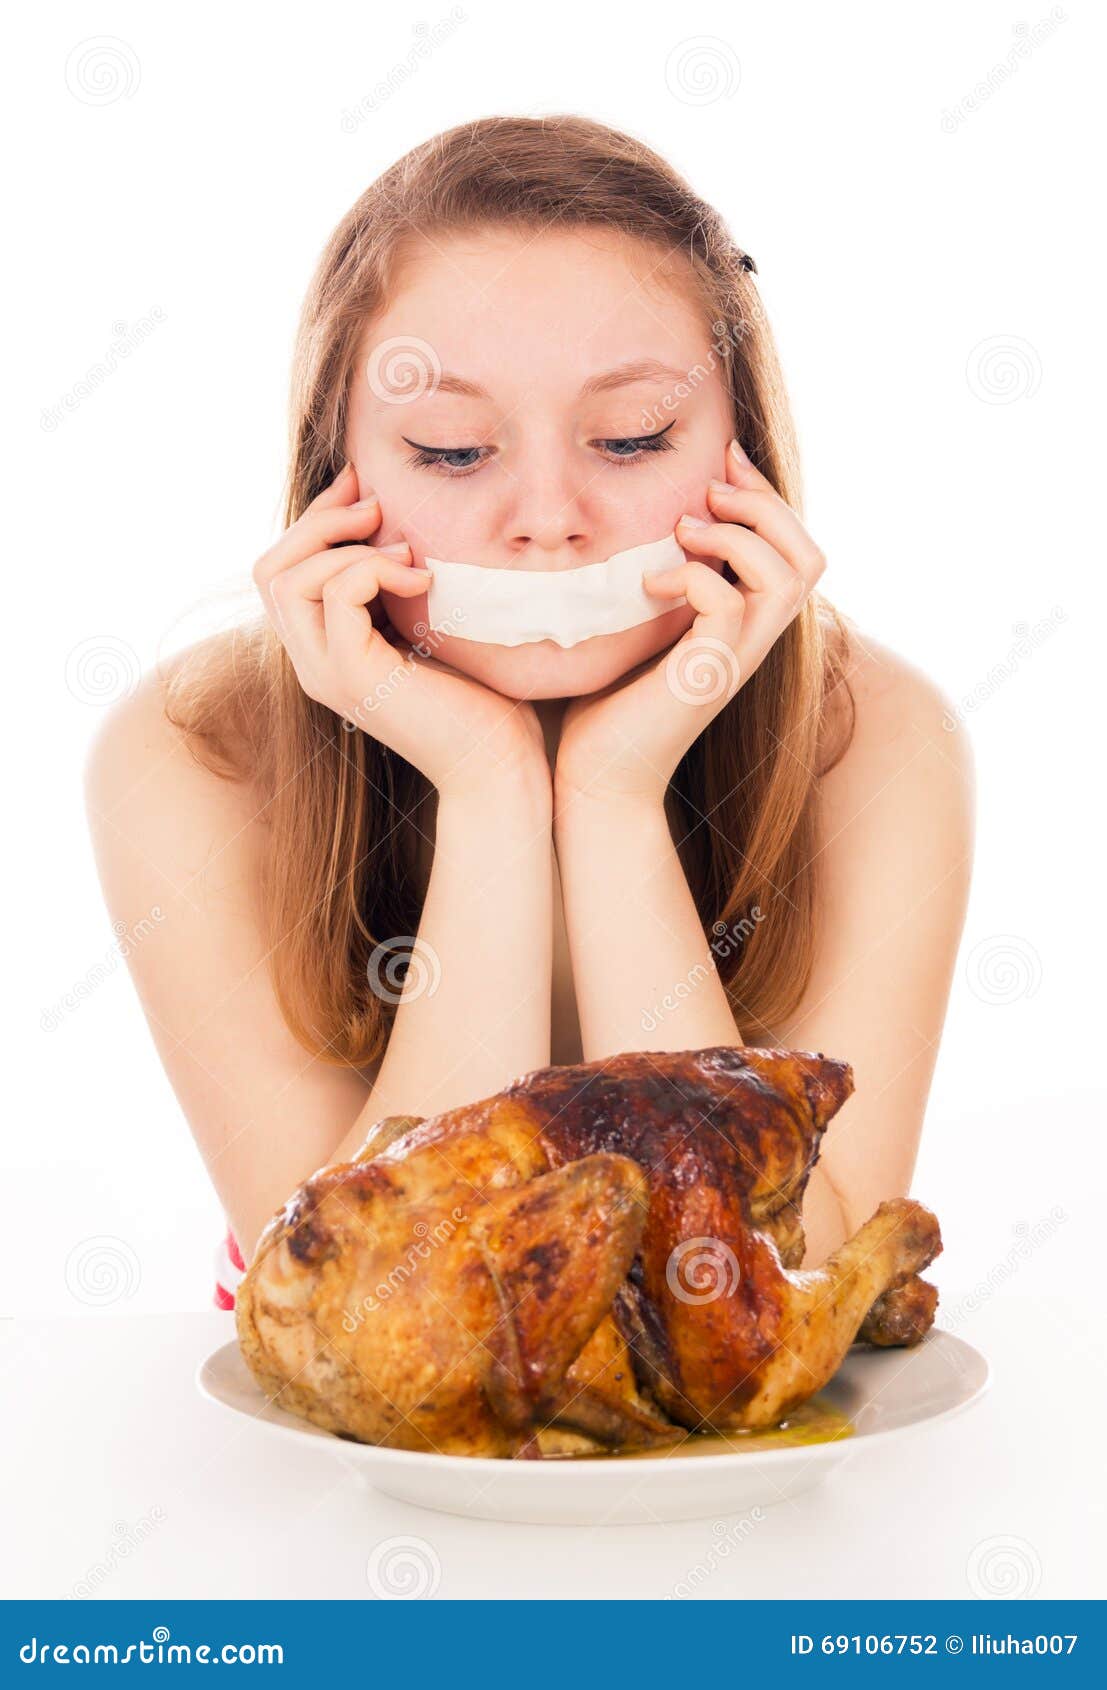 The Girl on a Diet, and Want To Eat Meat Stock Photo - Image of lifestyle,  caring: 69106752